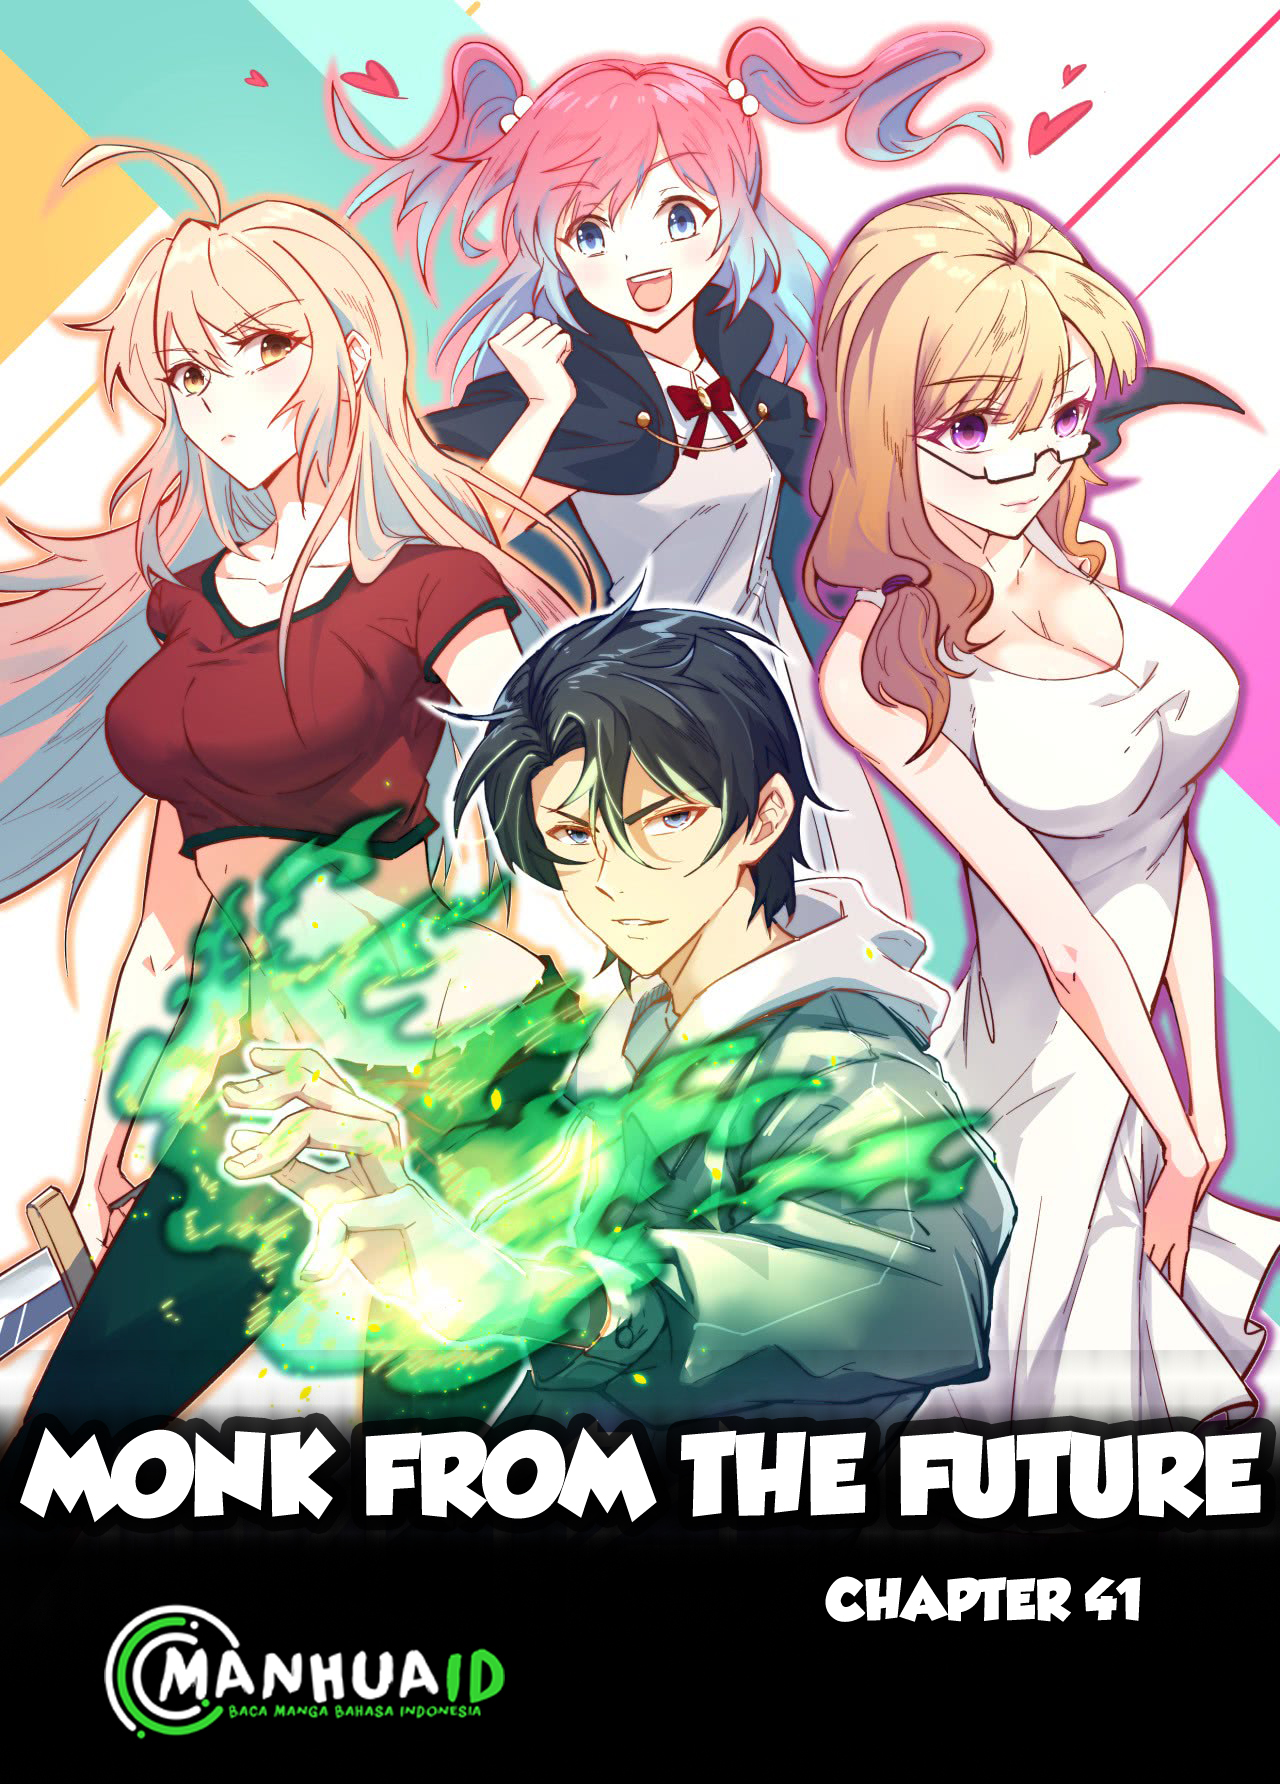 Monk From the Future Chapter 41